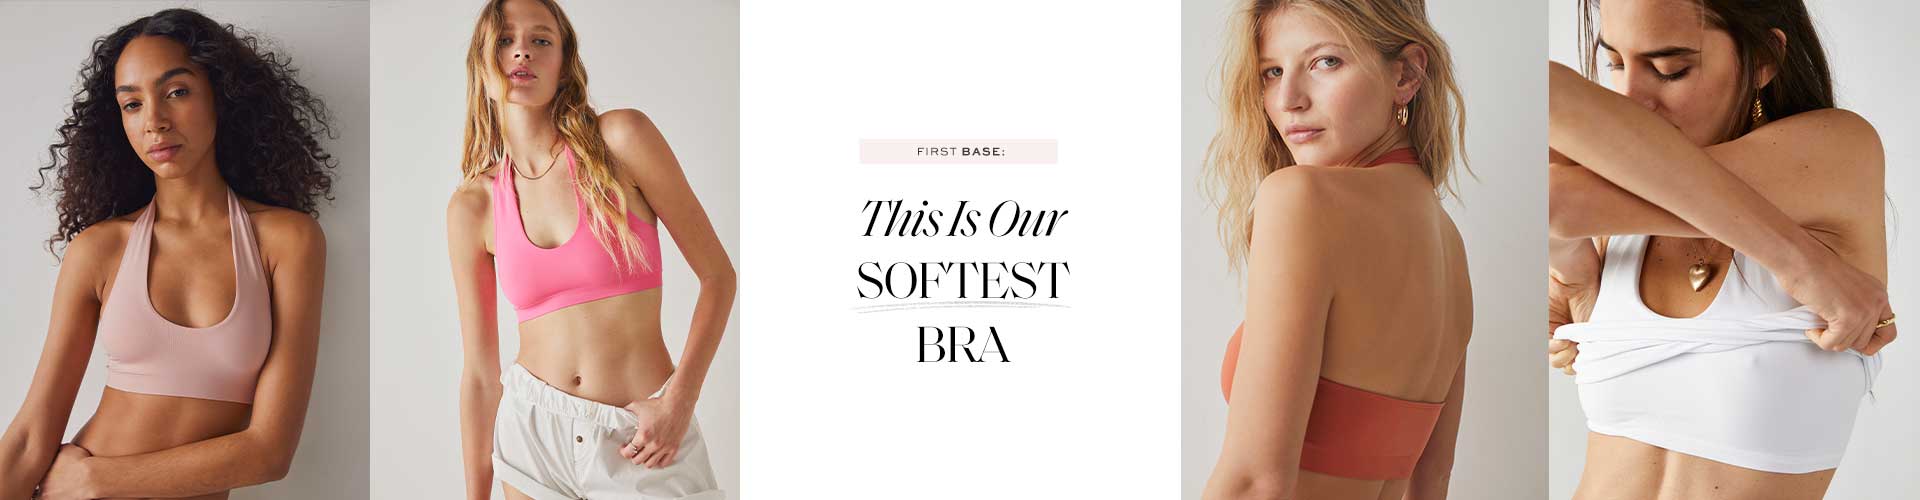 First Base: This Is Our SOFTEST Bra